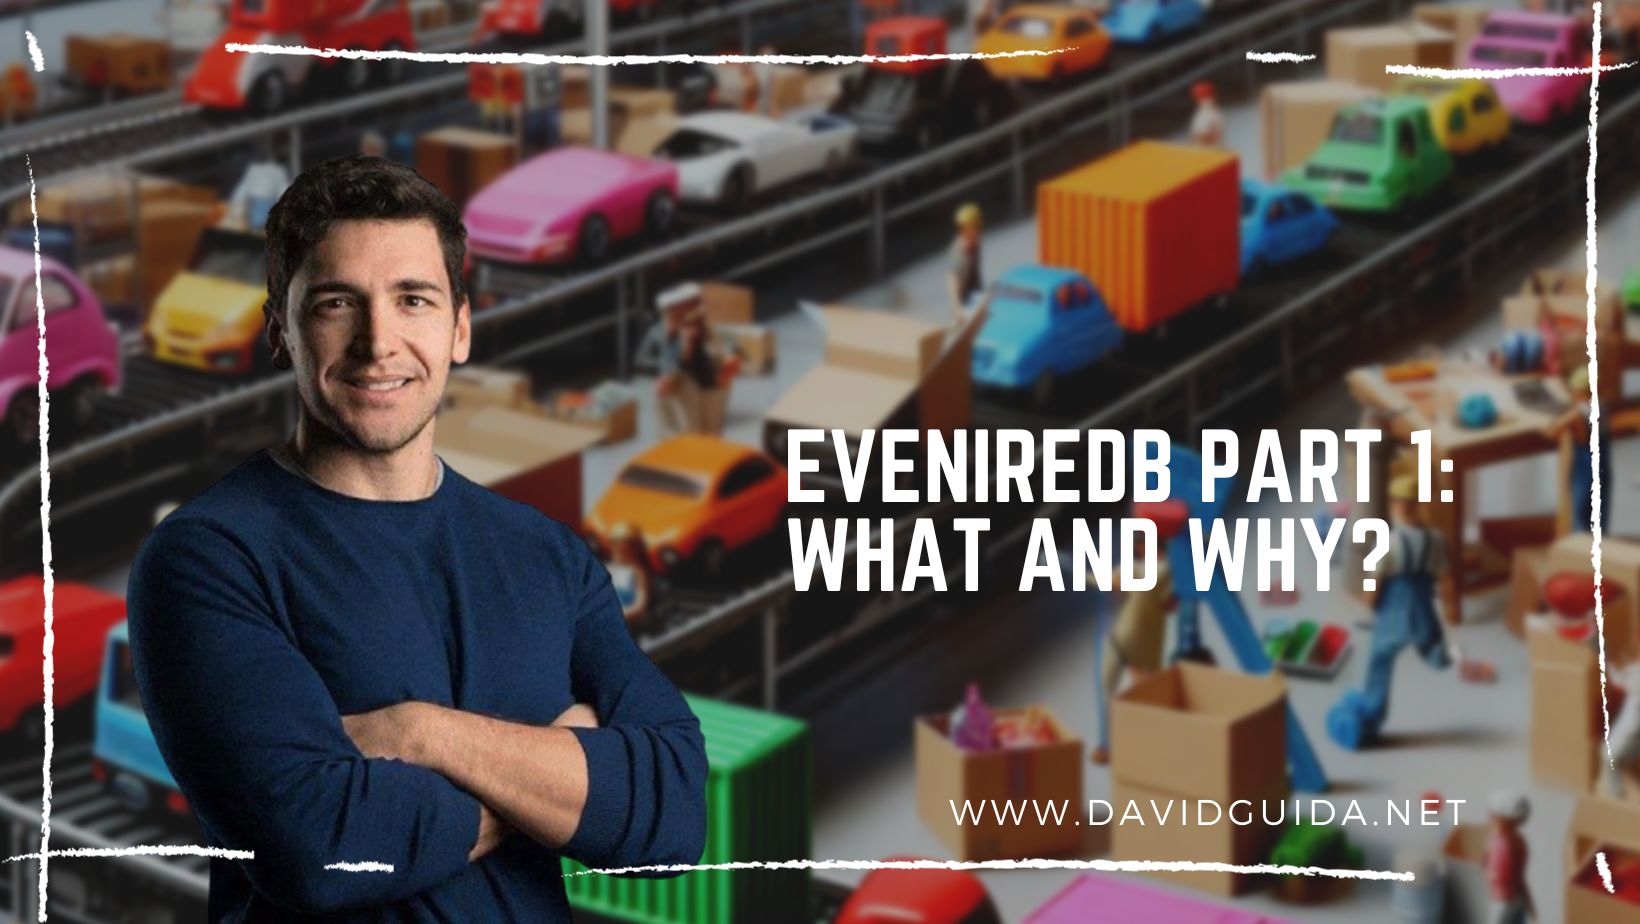 EvenireDB part 1: what and why?